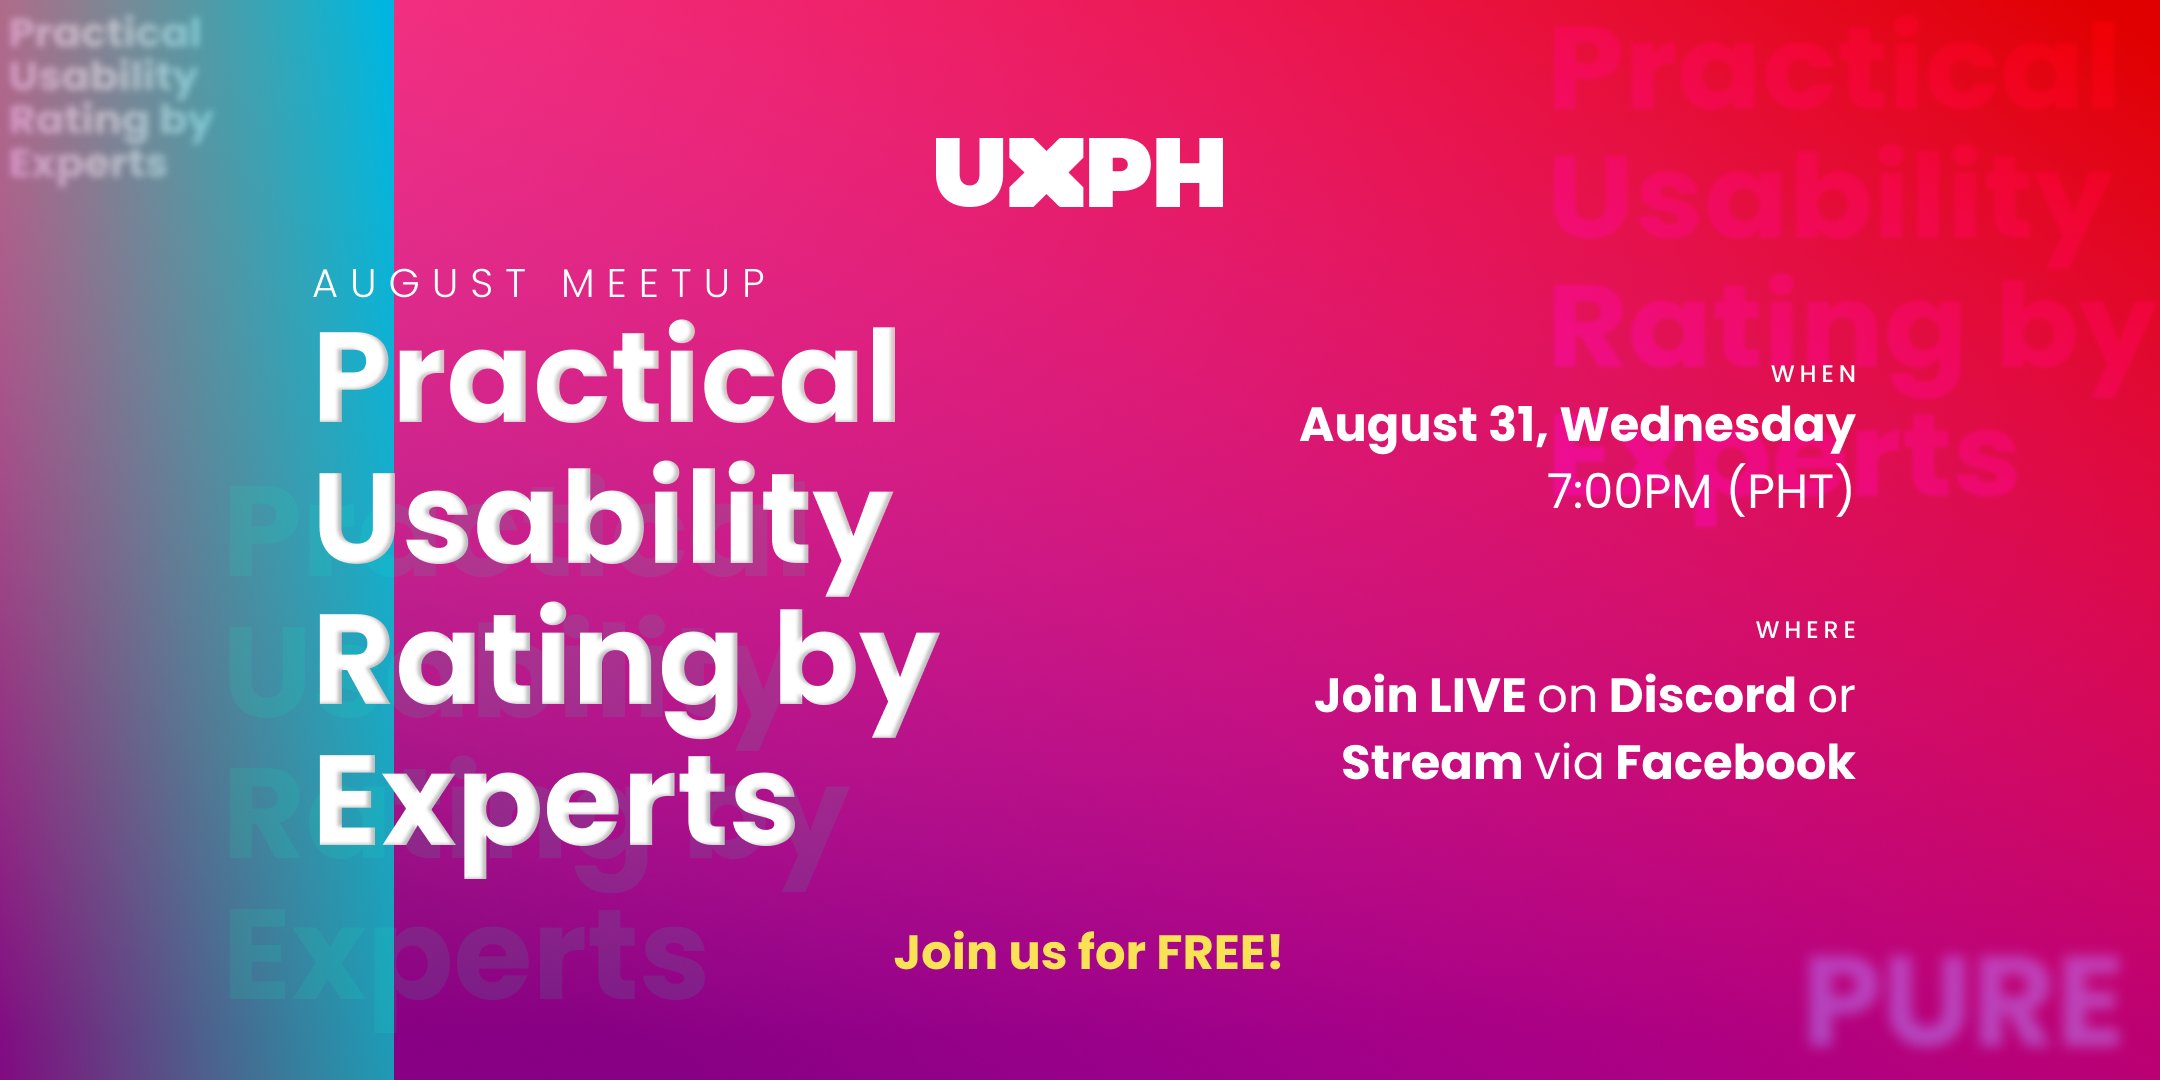 August Meetup: Practical Usability Rating by Experts (PURE)